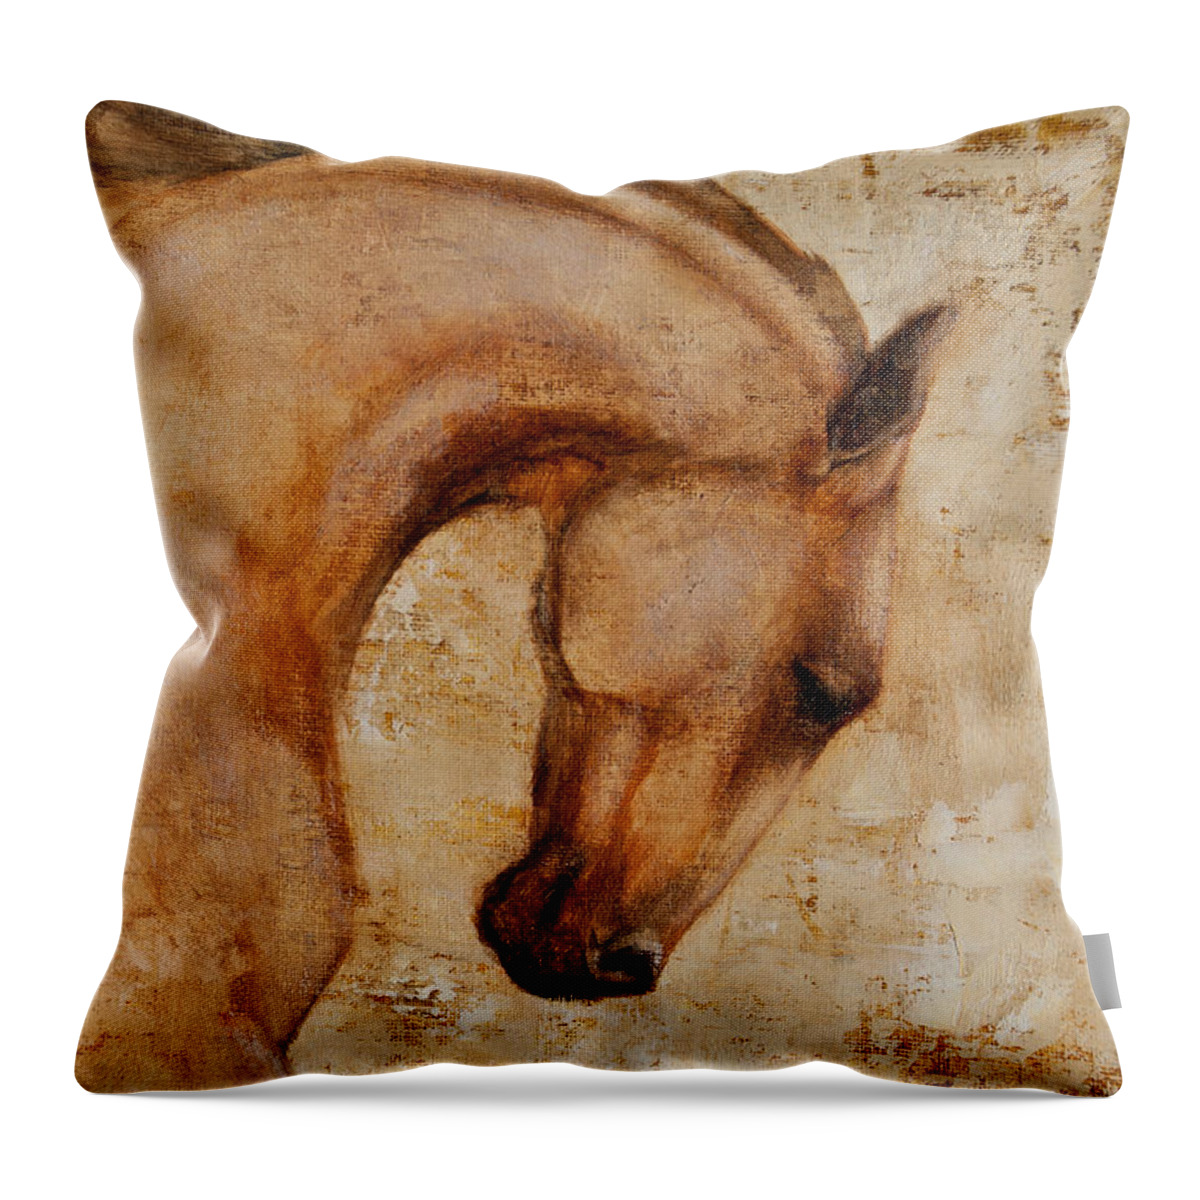 Horses Throw Pillow featuring the painting Painted Determination 1 by Jani Freimann